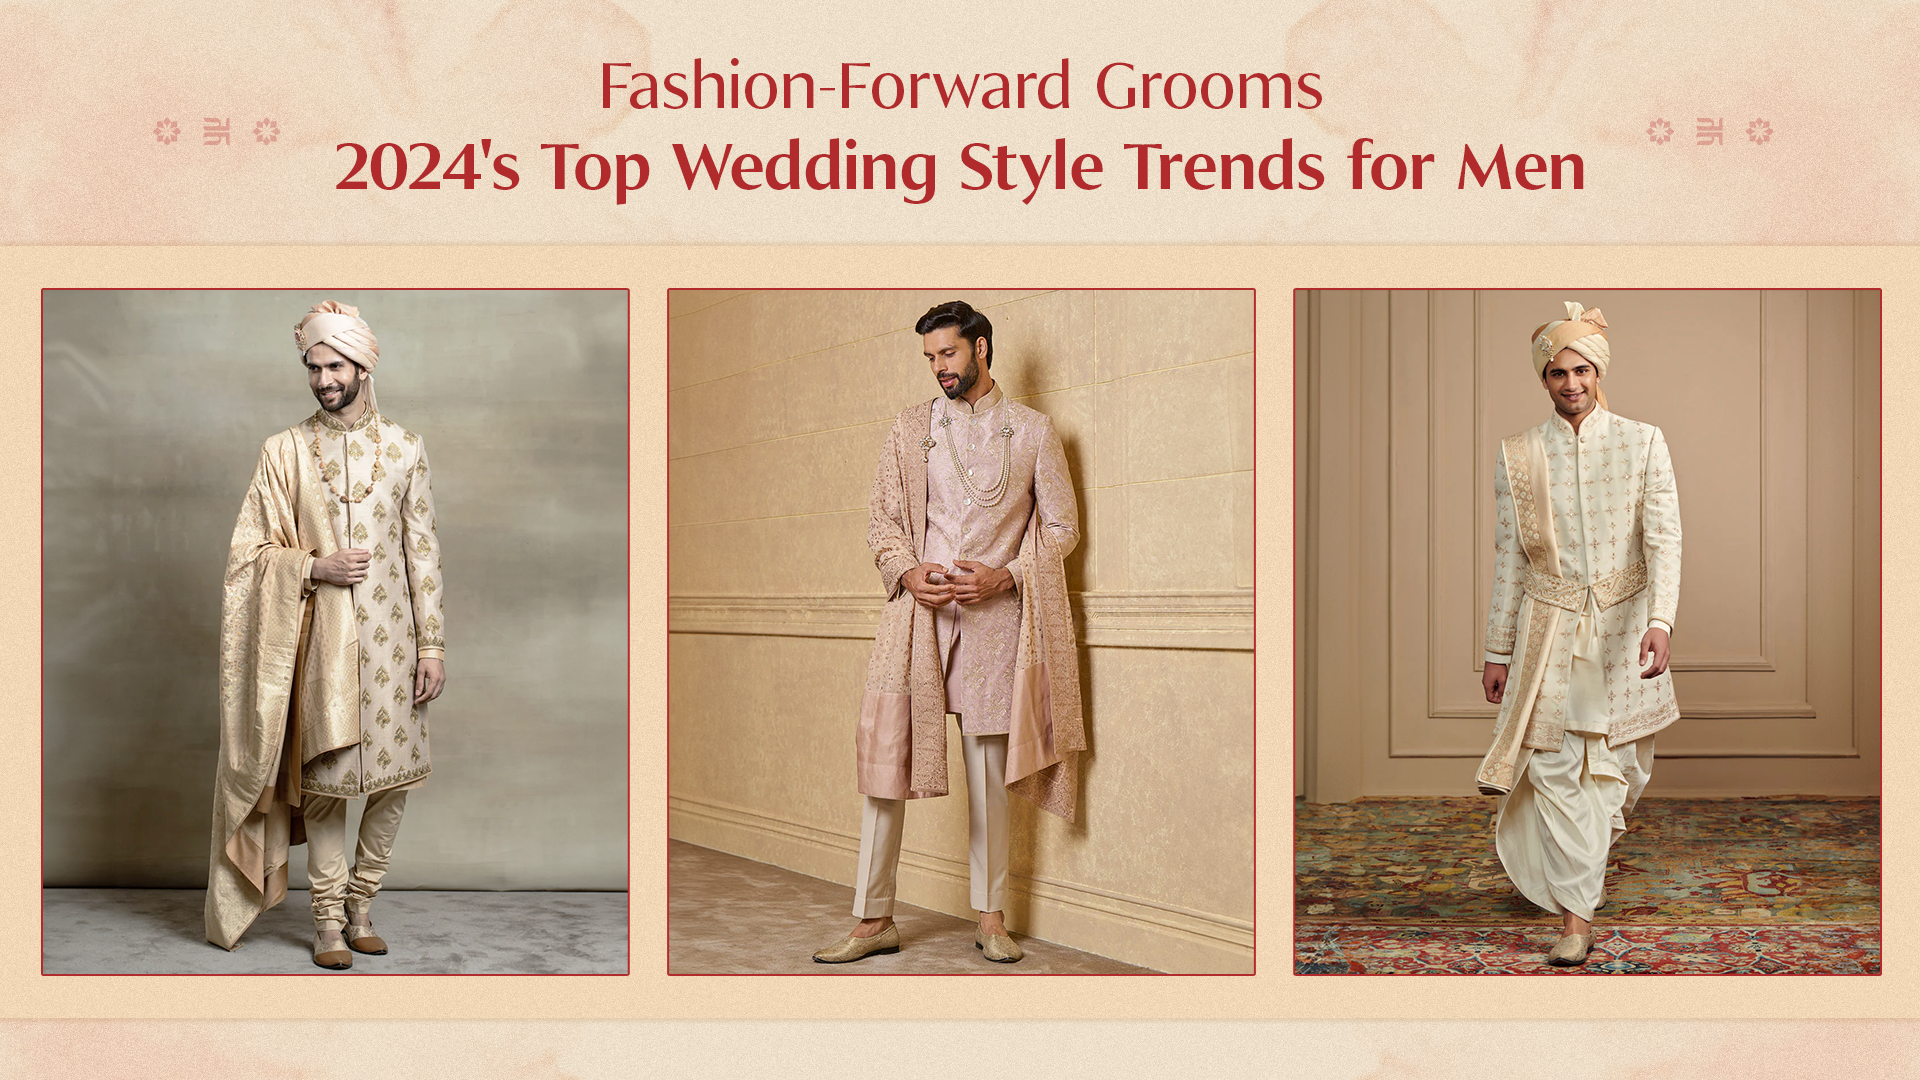 Fashion-Forward Grooms: 2024's Top Wedding Style Trends for Men